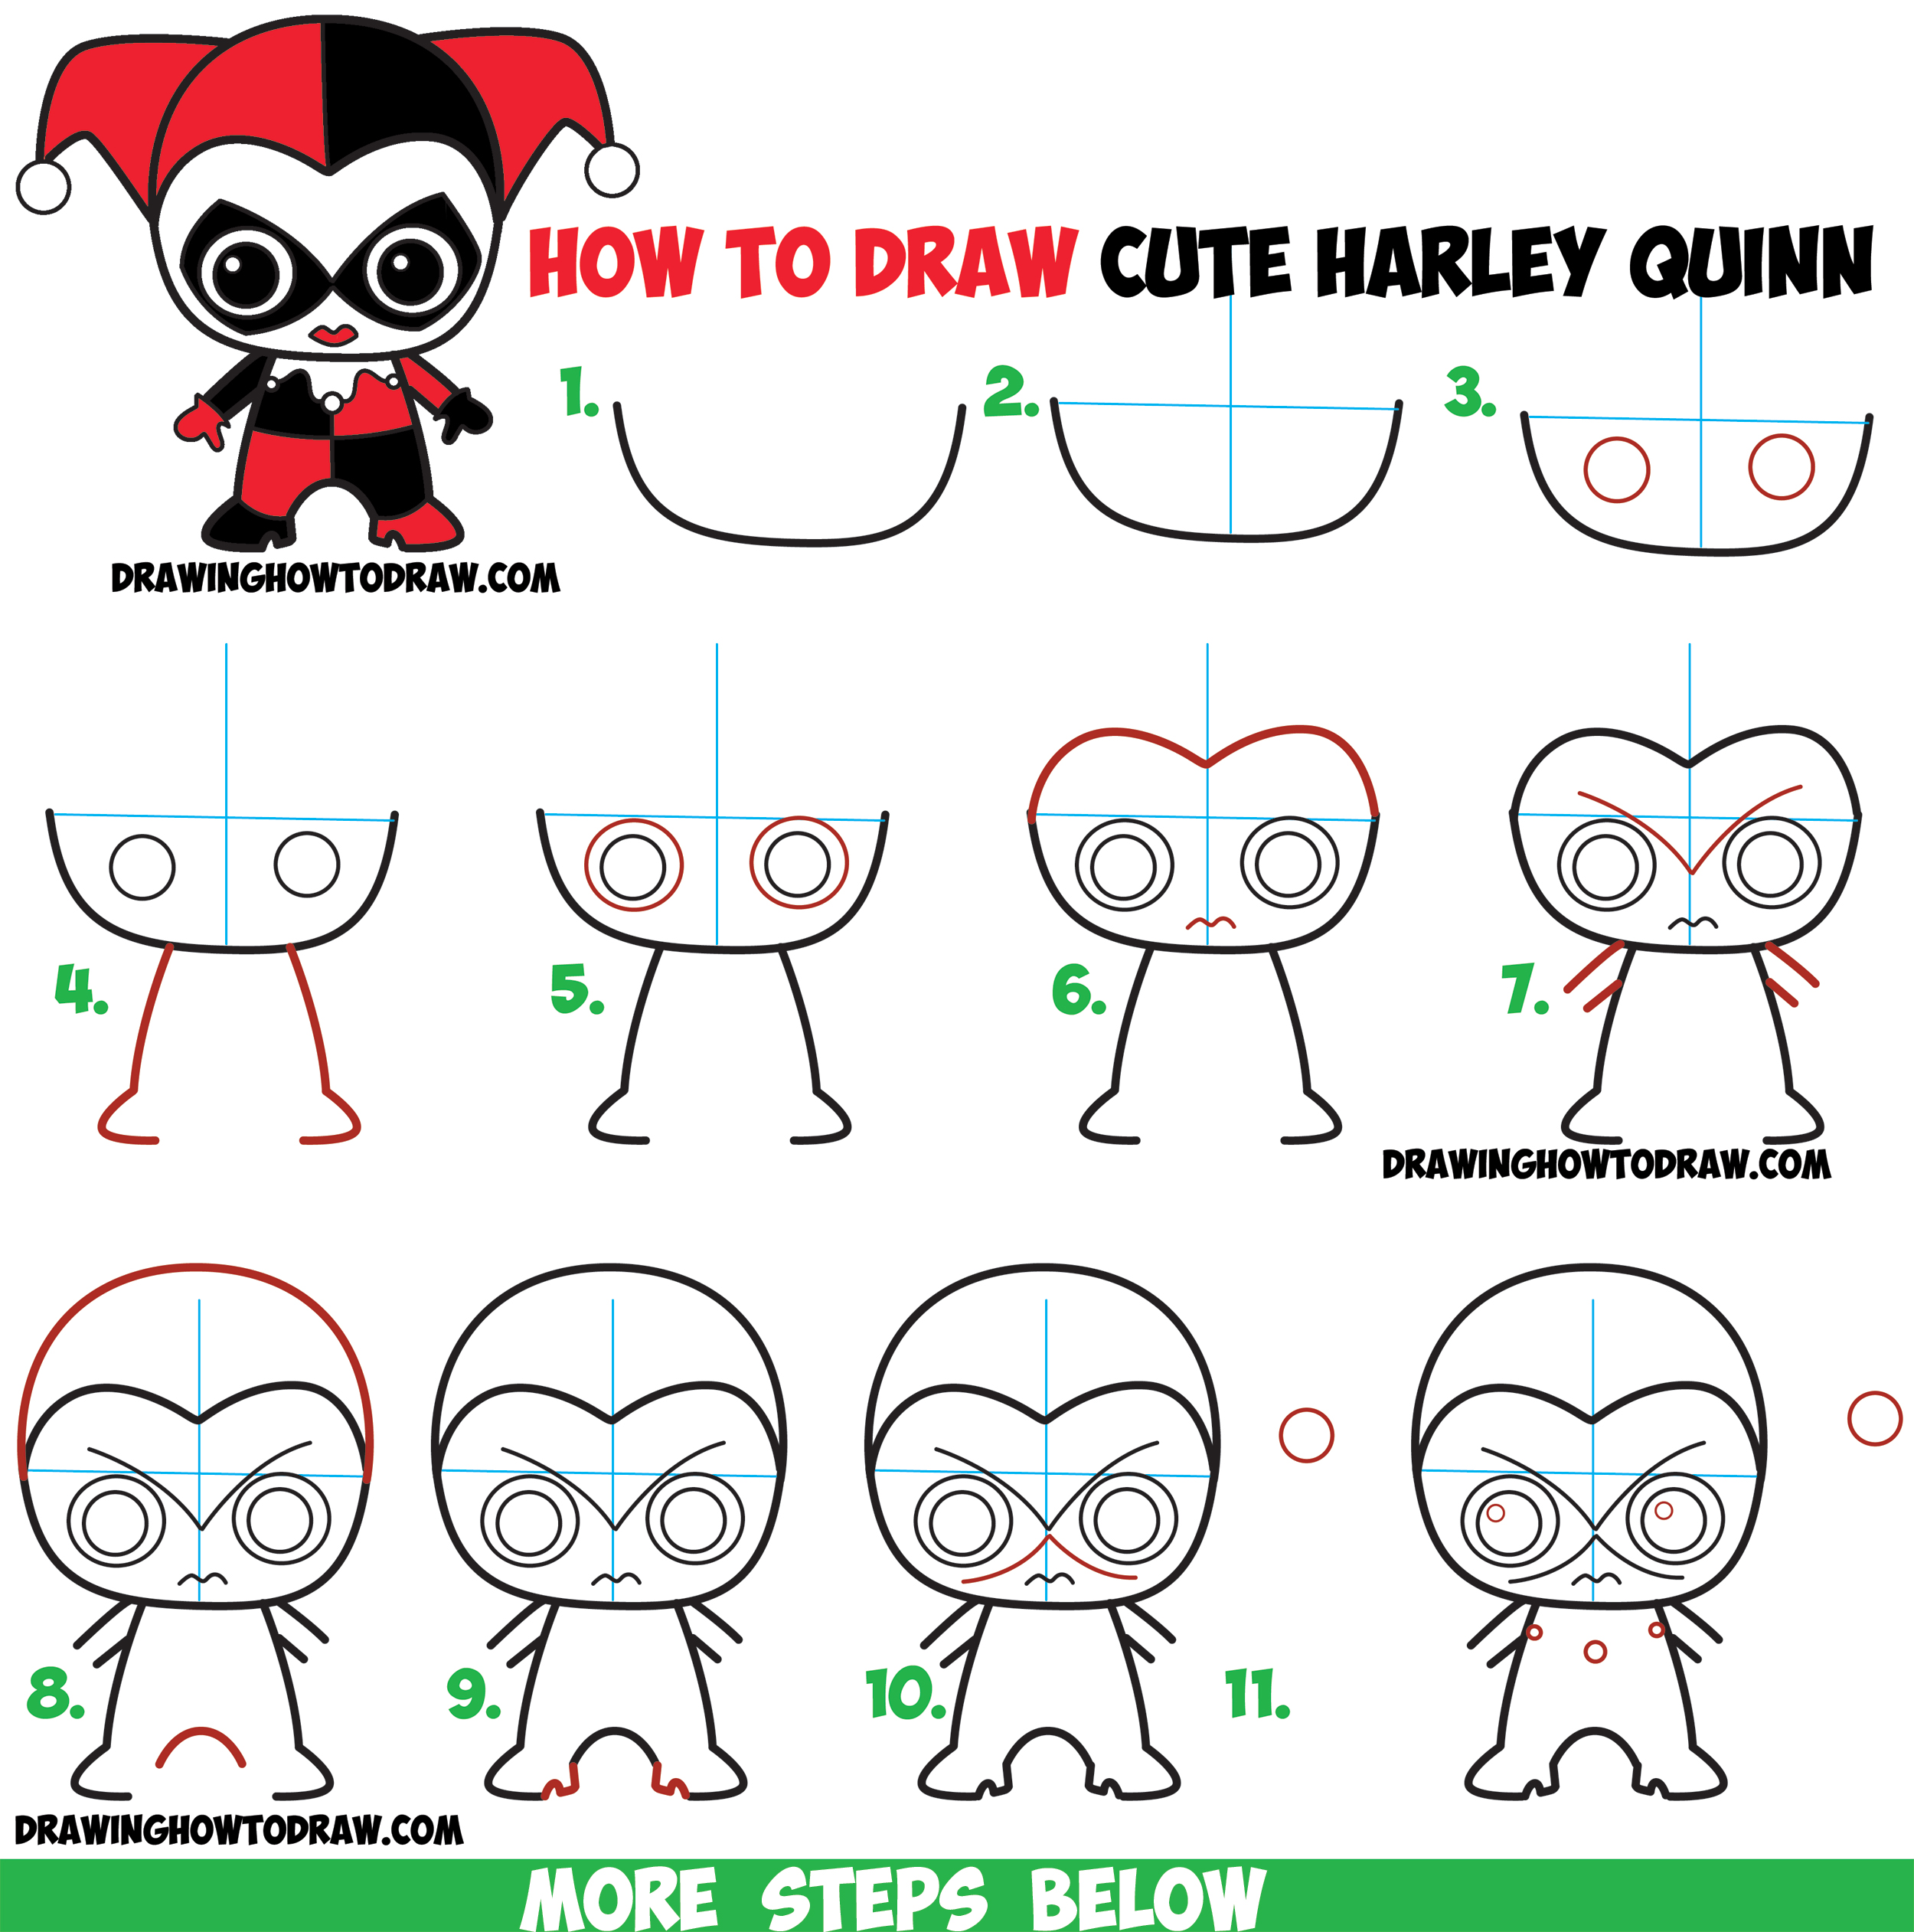 How To Draw Cute Chibi Harley Quinn From Dc Comics In Easy Step By Step Drawing Tutorial For Kids Beginners How To Draw Step By Step Drawing Tutorials